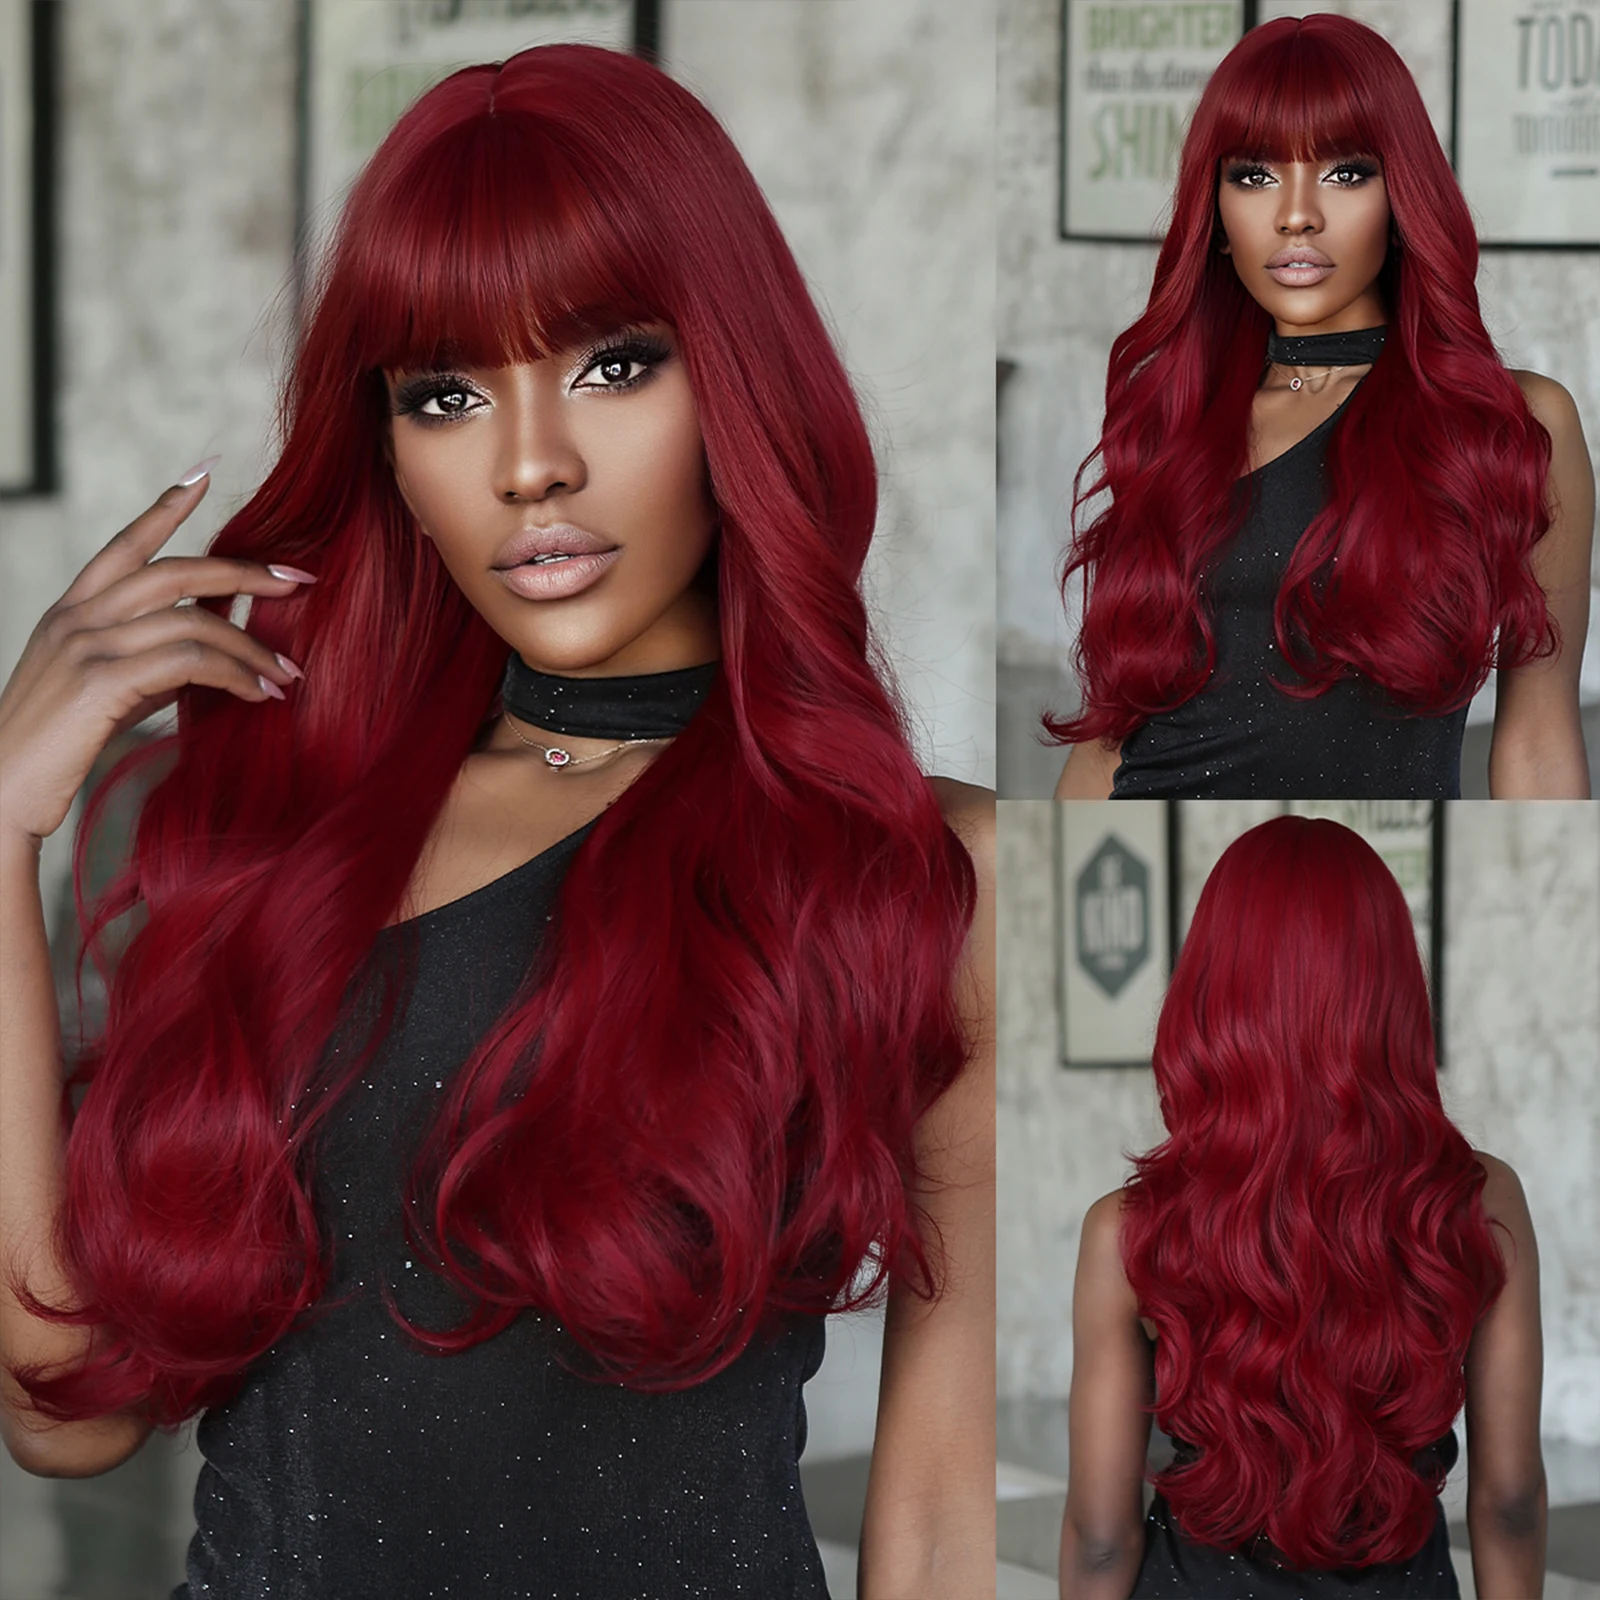 EASIHAIR Wine Red Long Synthetic Wigs Water Wavy Dark Red Cosplay Wig with Bangs for Black Women Party Heat Resistant Fake Hair